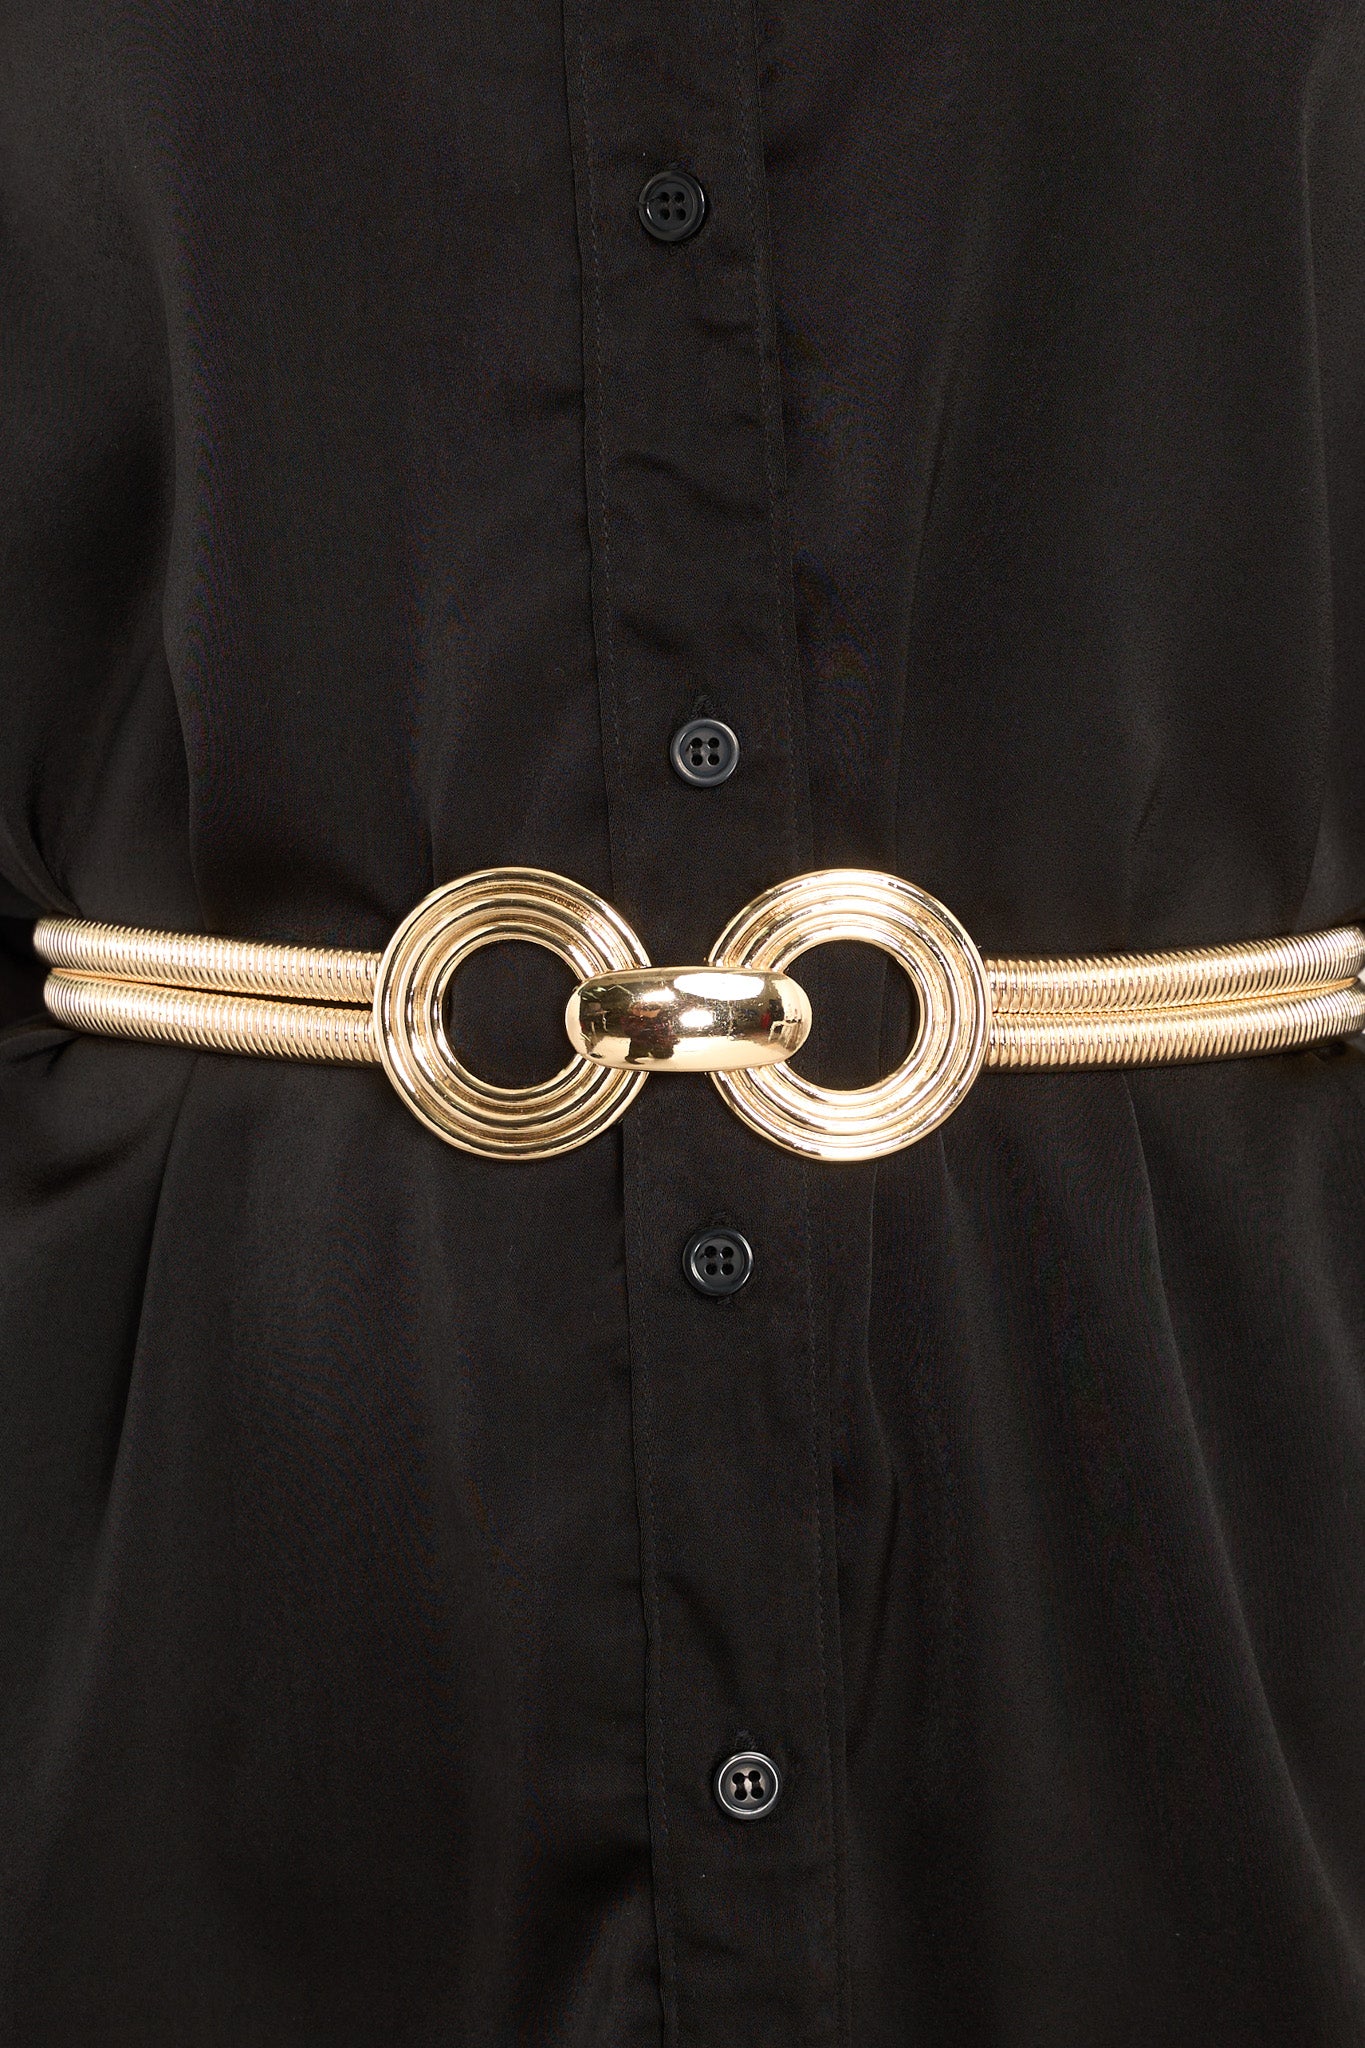 Close up view of gold belt featuring a slightly stretchy gold snake chain link design, circle detailing at the center, and a hook closure.